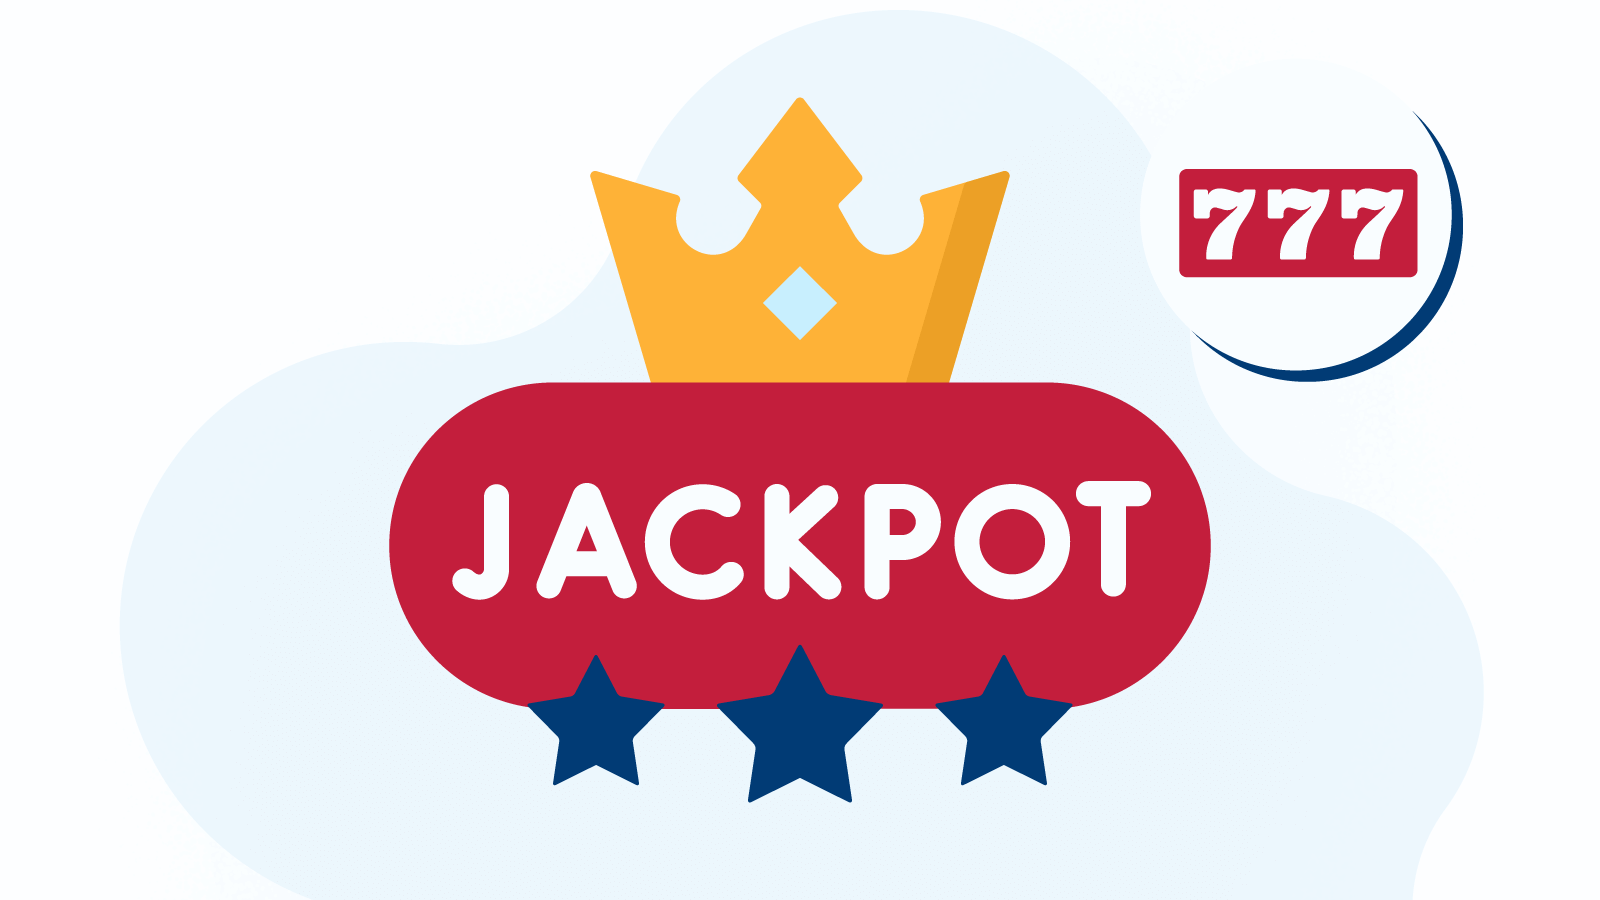 Jackpot slots from IGT casinos UK